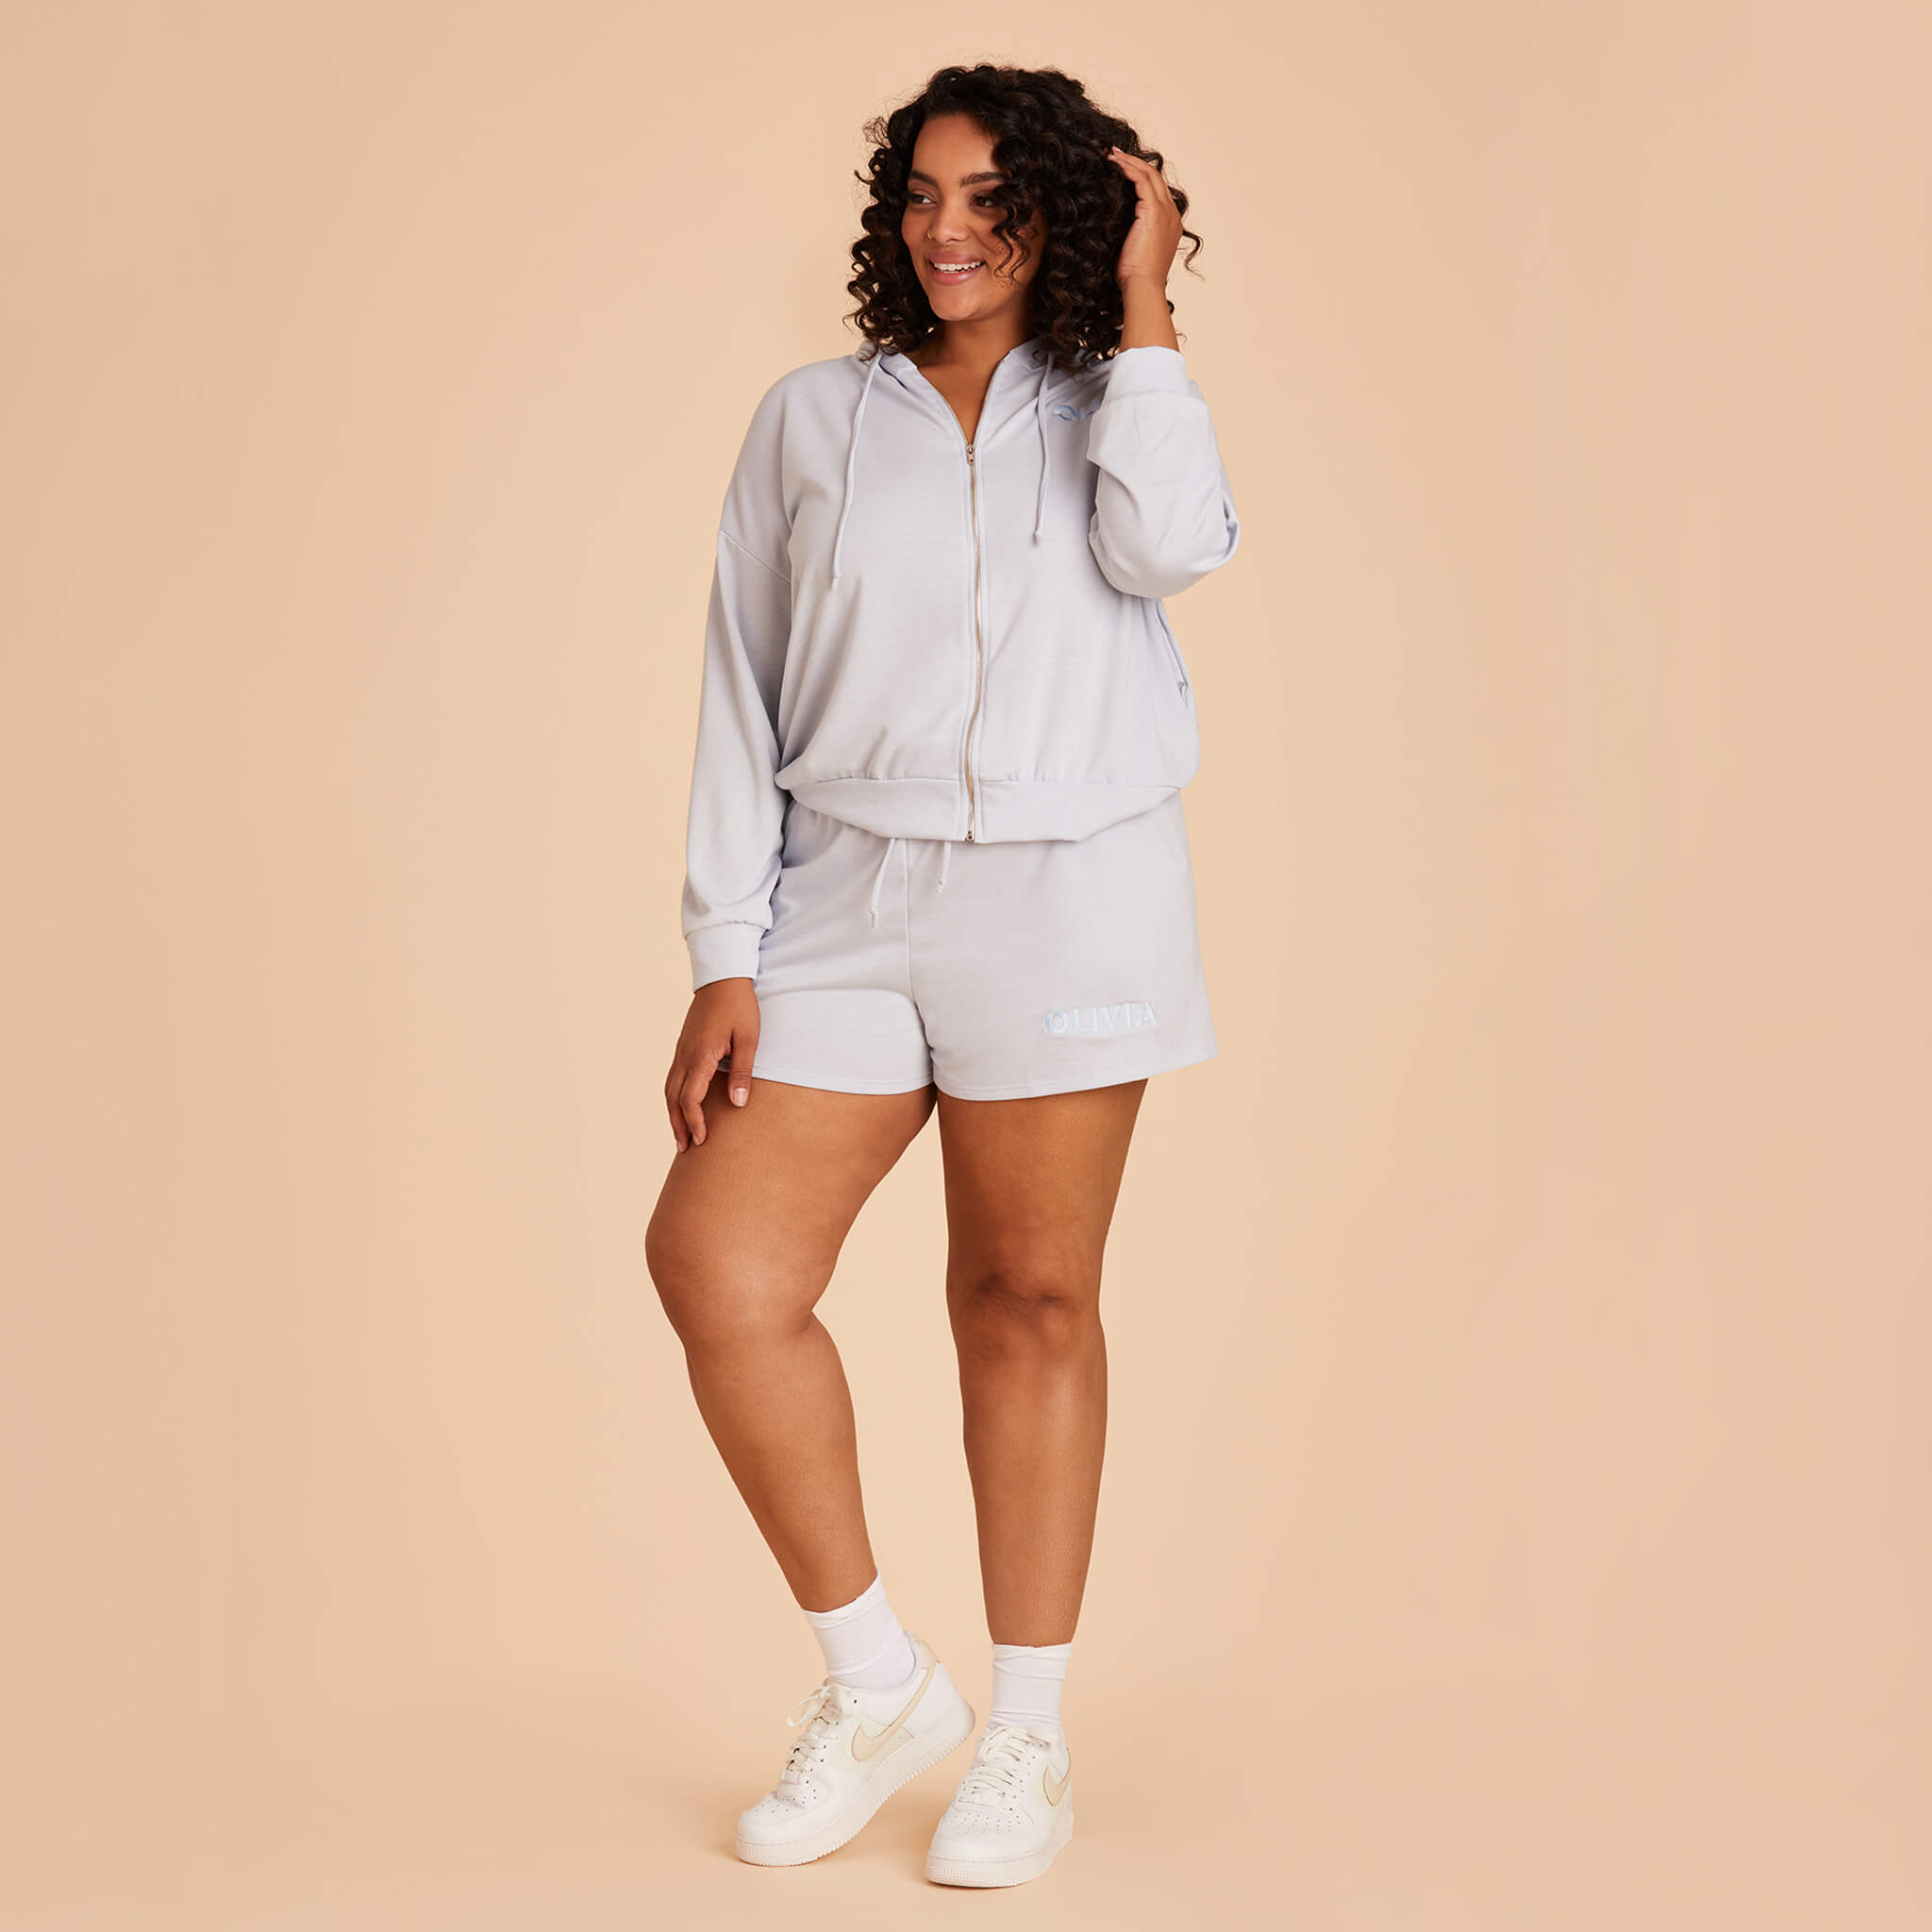 Plus Size Light Blue hoodie and shorts with personalization